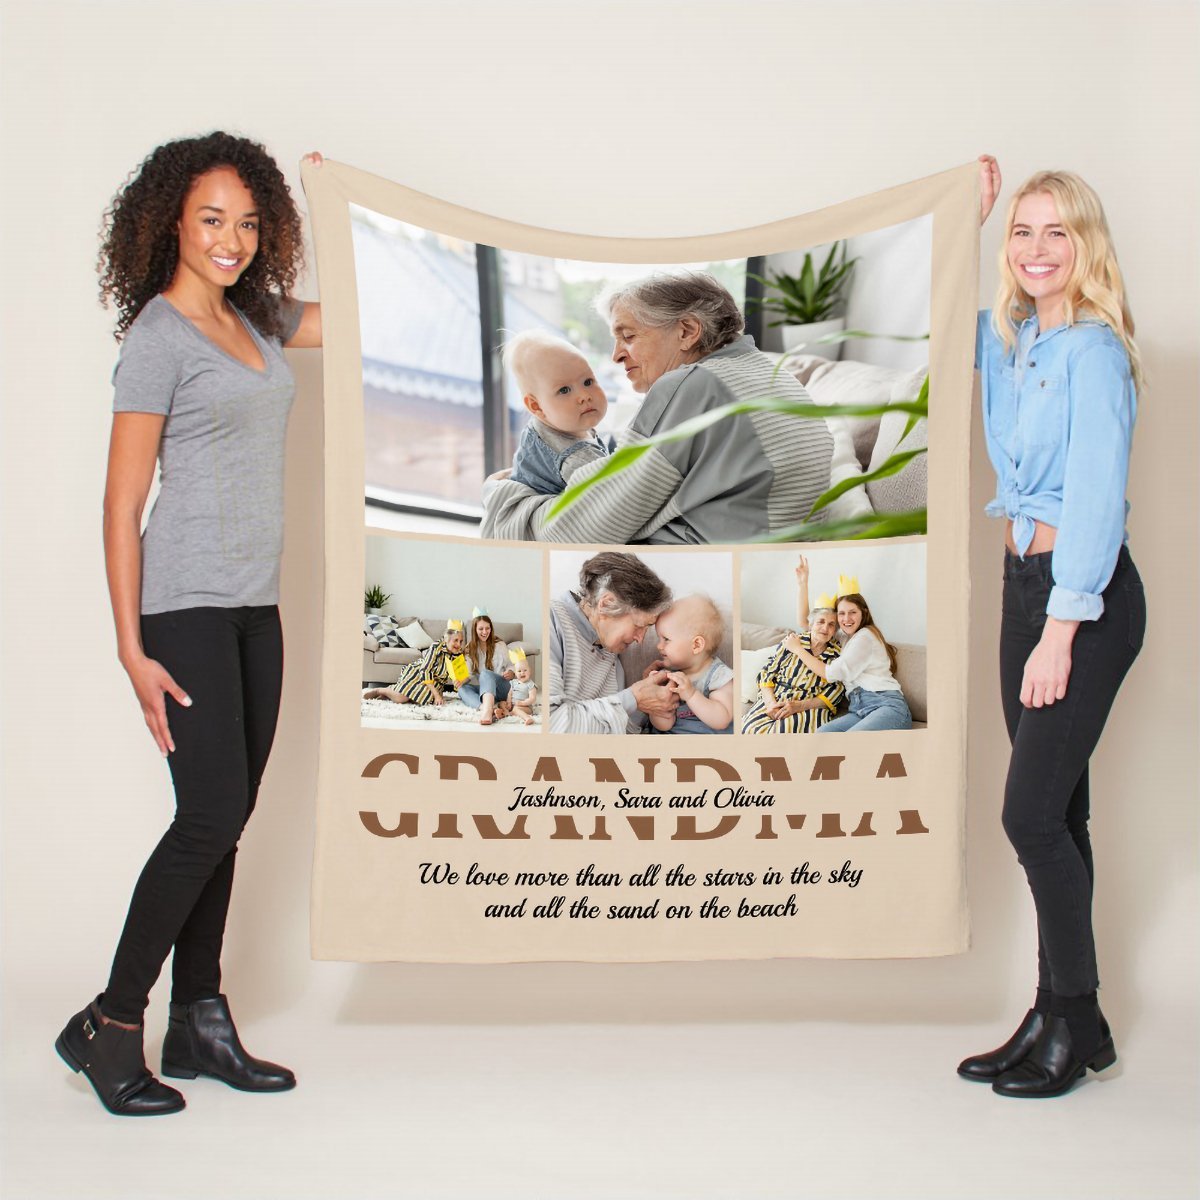 Looking for a way to strengthen the grandma-granddaughter bond? You’re in the right place. A warm blanket on cold days will be a thoughtful gift making you become the best granddaughter ever. You can create your very own Photo Blanket with name, photos, and message with just a few clicks!